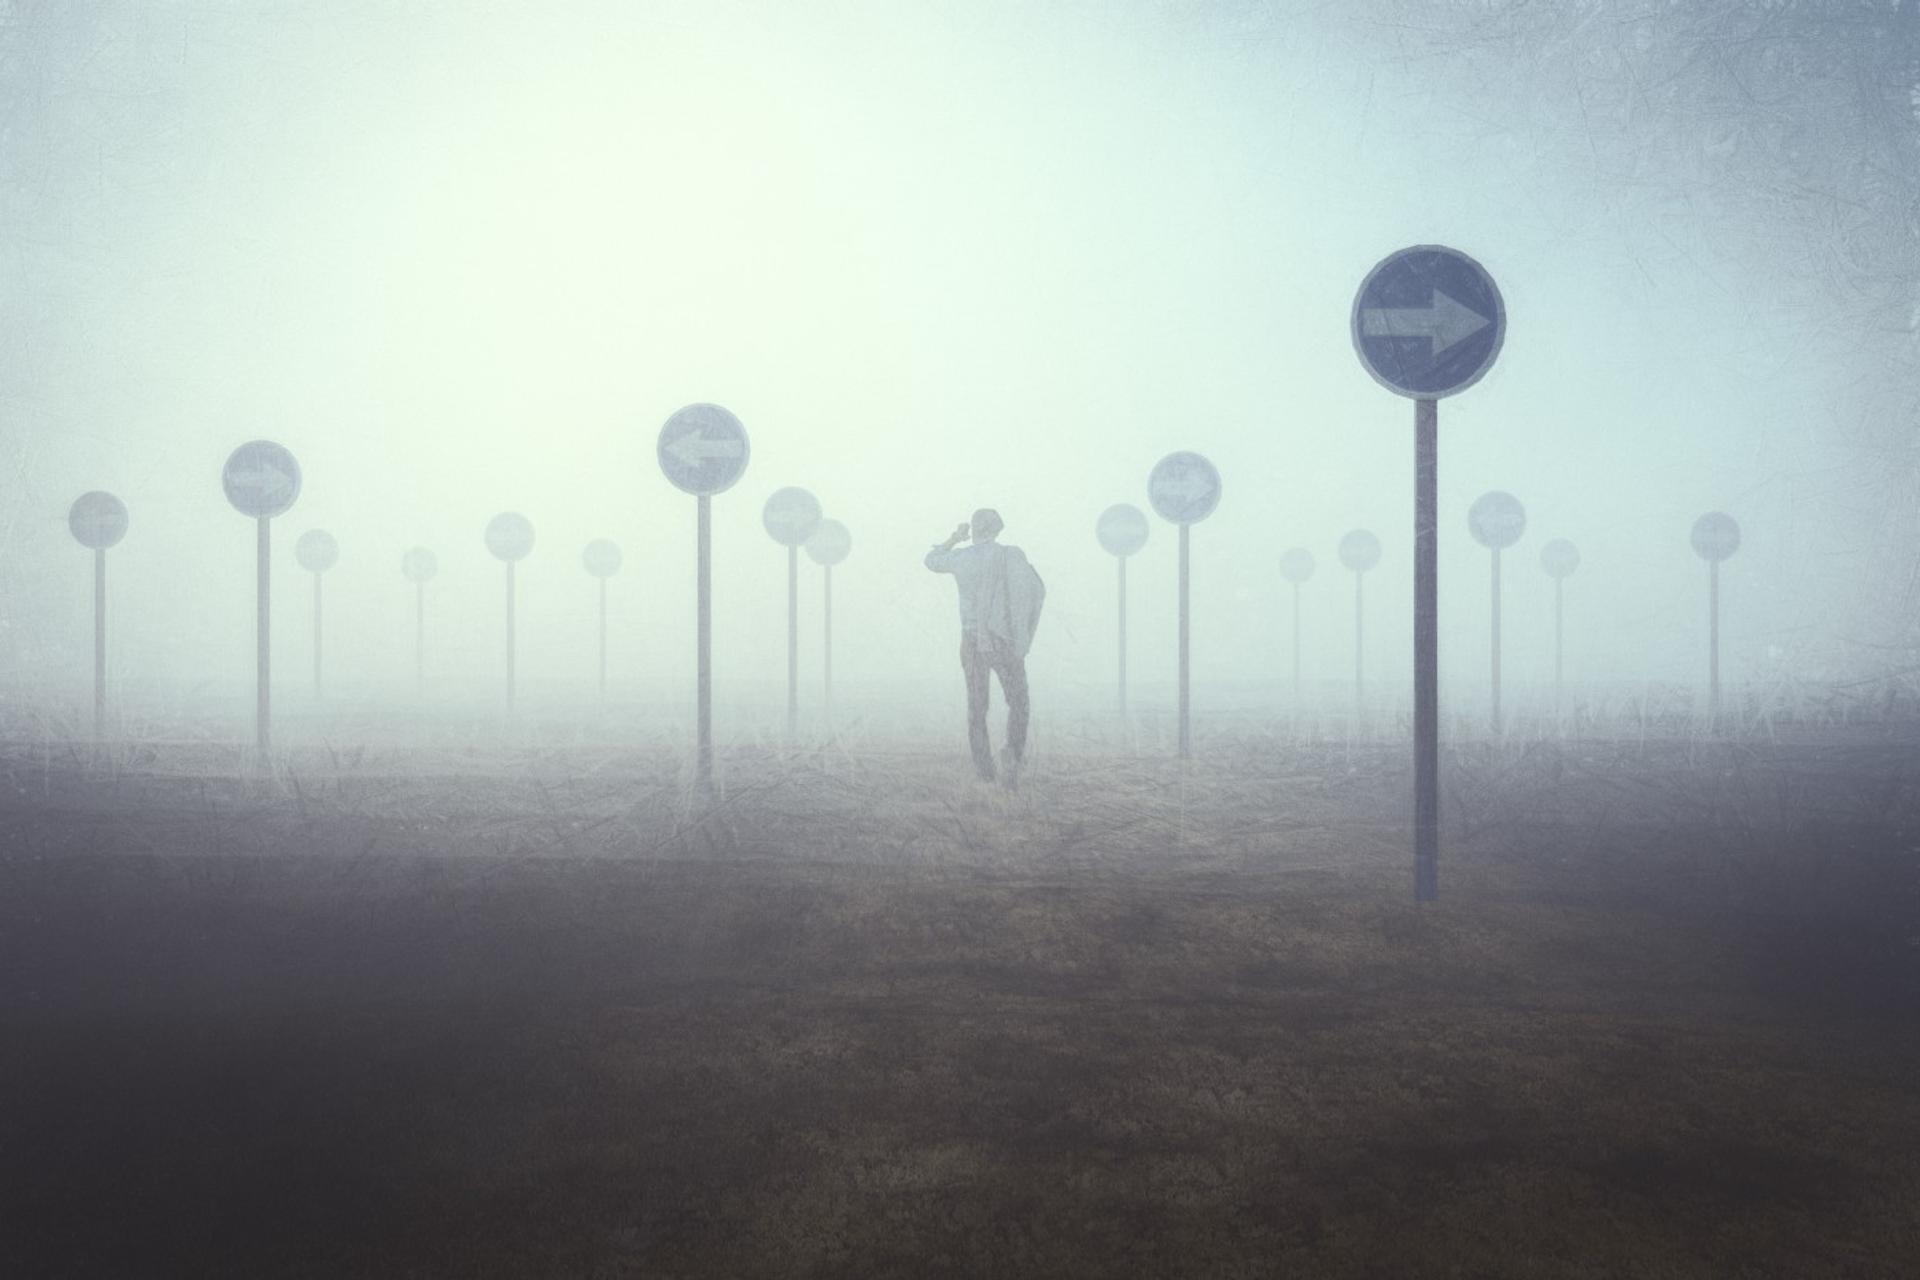 Man walking in foggy field with confusing sign-posts